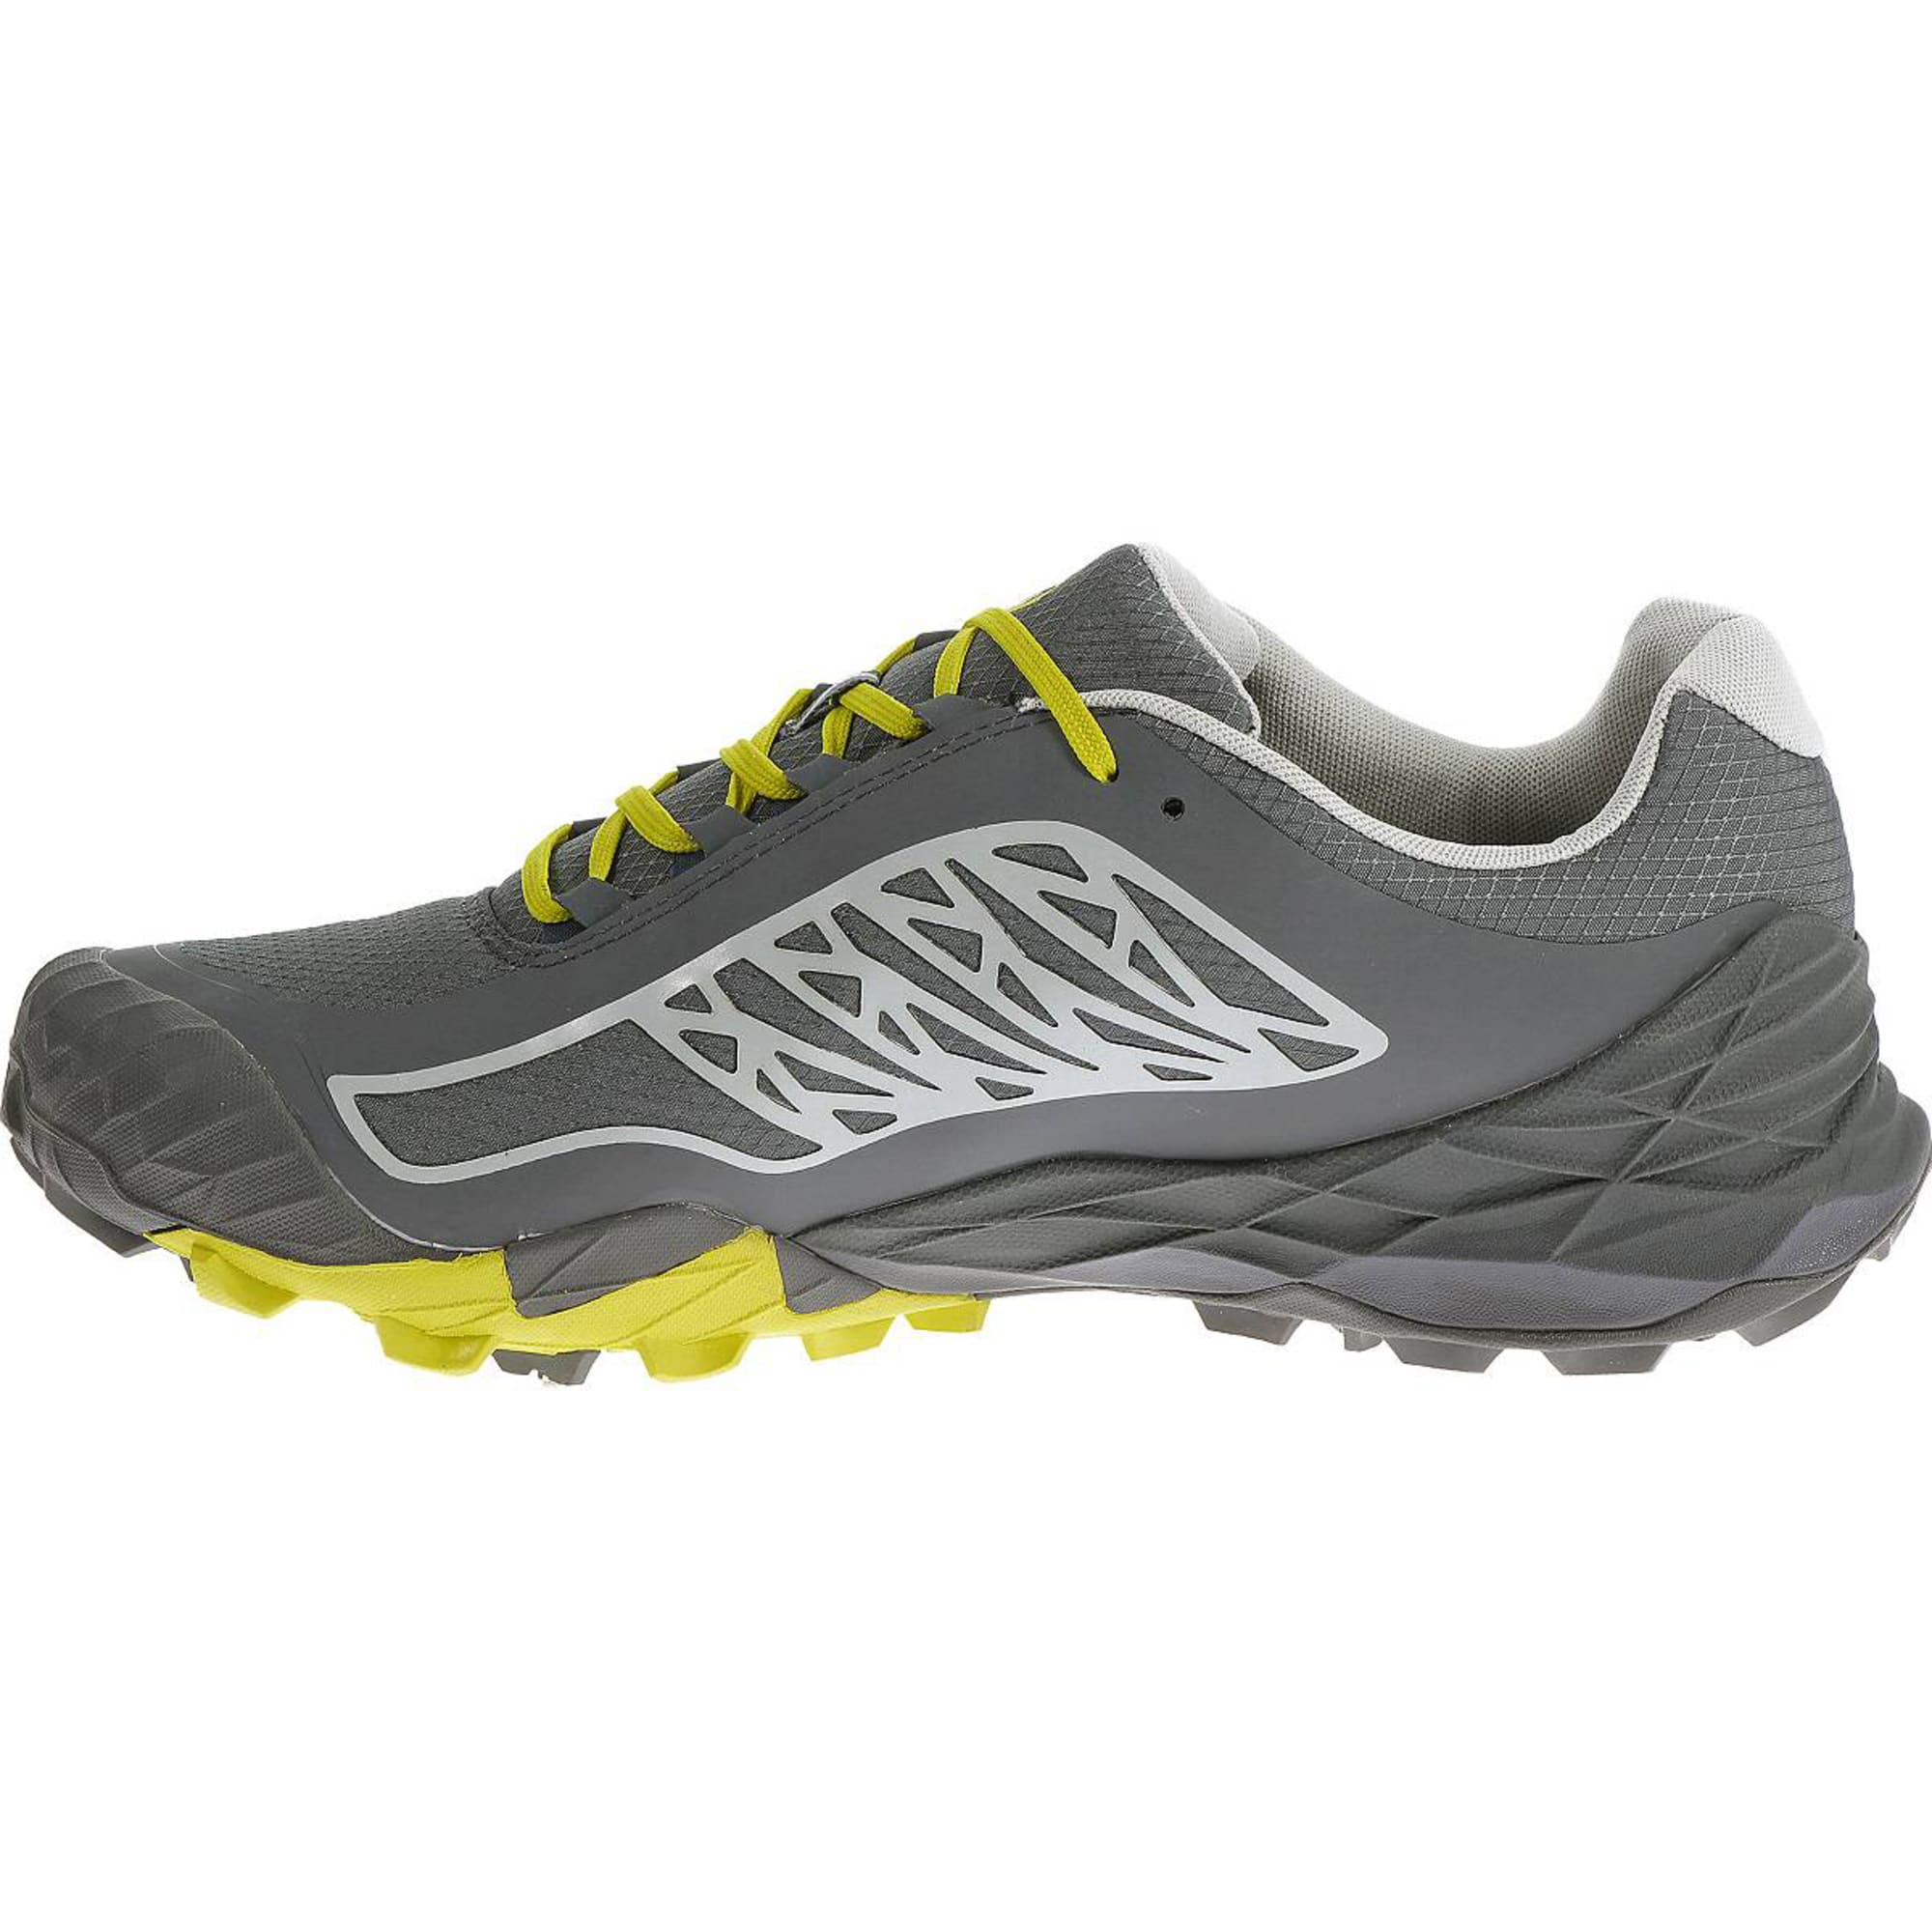 Men's All Out Ice Waterproof Running Shoes, Turbulence/Bright Yellow - Eastern Mountain Sports